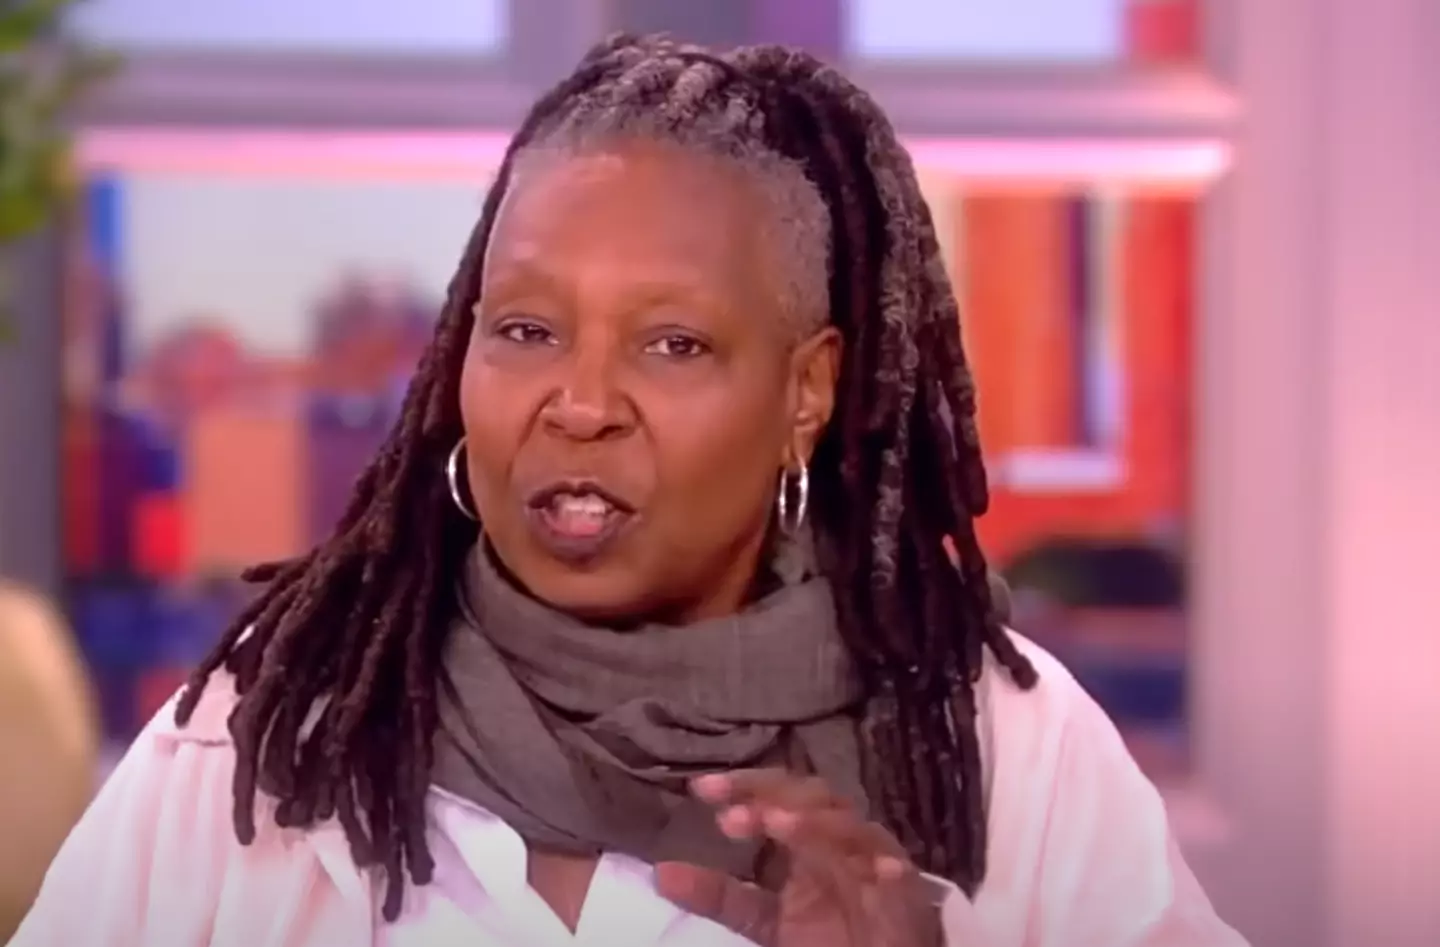 Whoopi Goldberg condemned the rumors she was on the list or had any connection to Jeffrey Epstein.